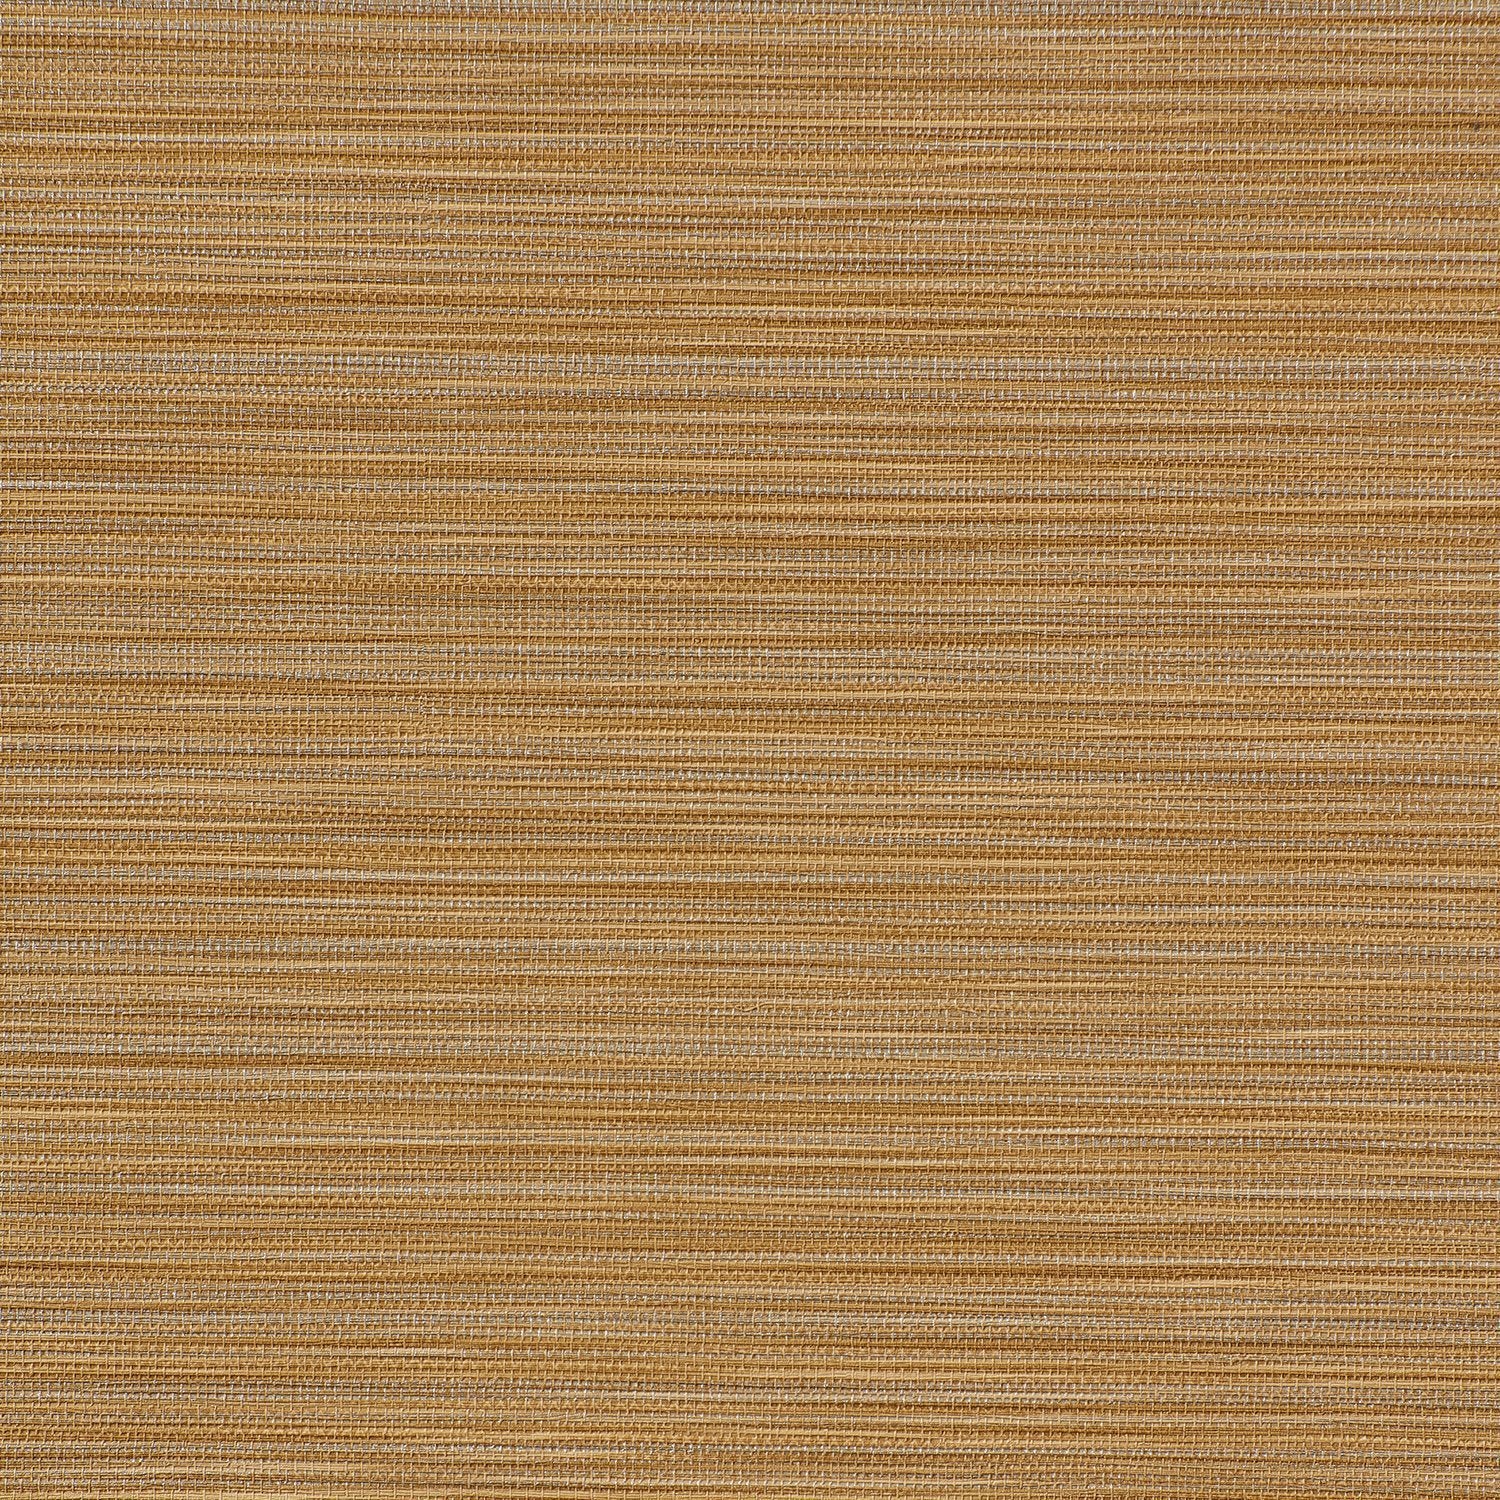 In Stitches - Y47813 - Wallcovering - Vycon - Kube Contract